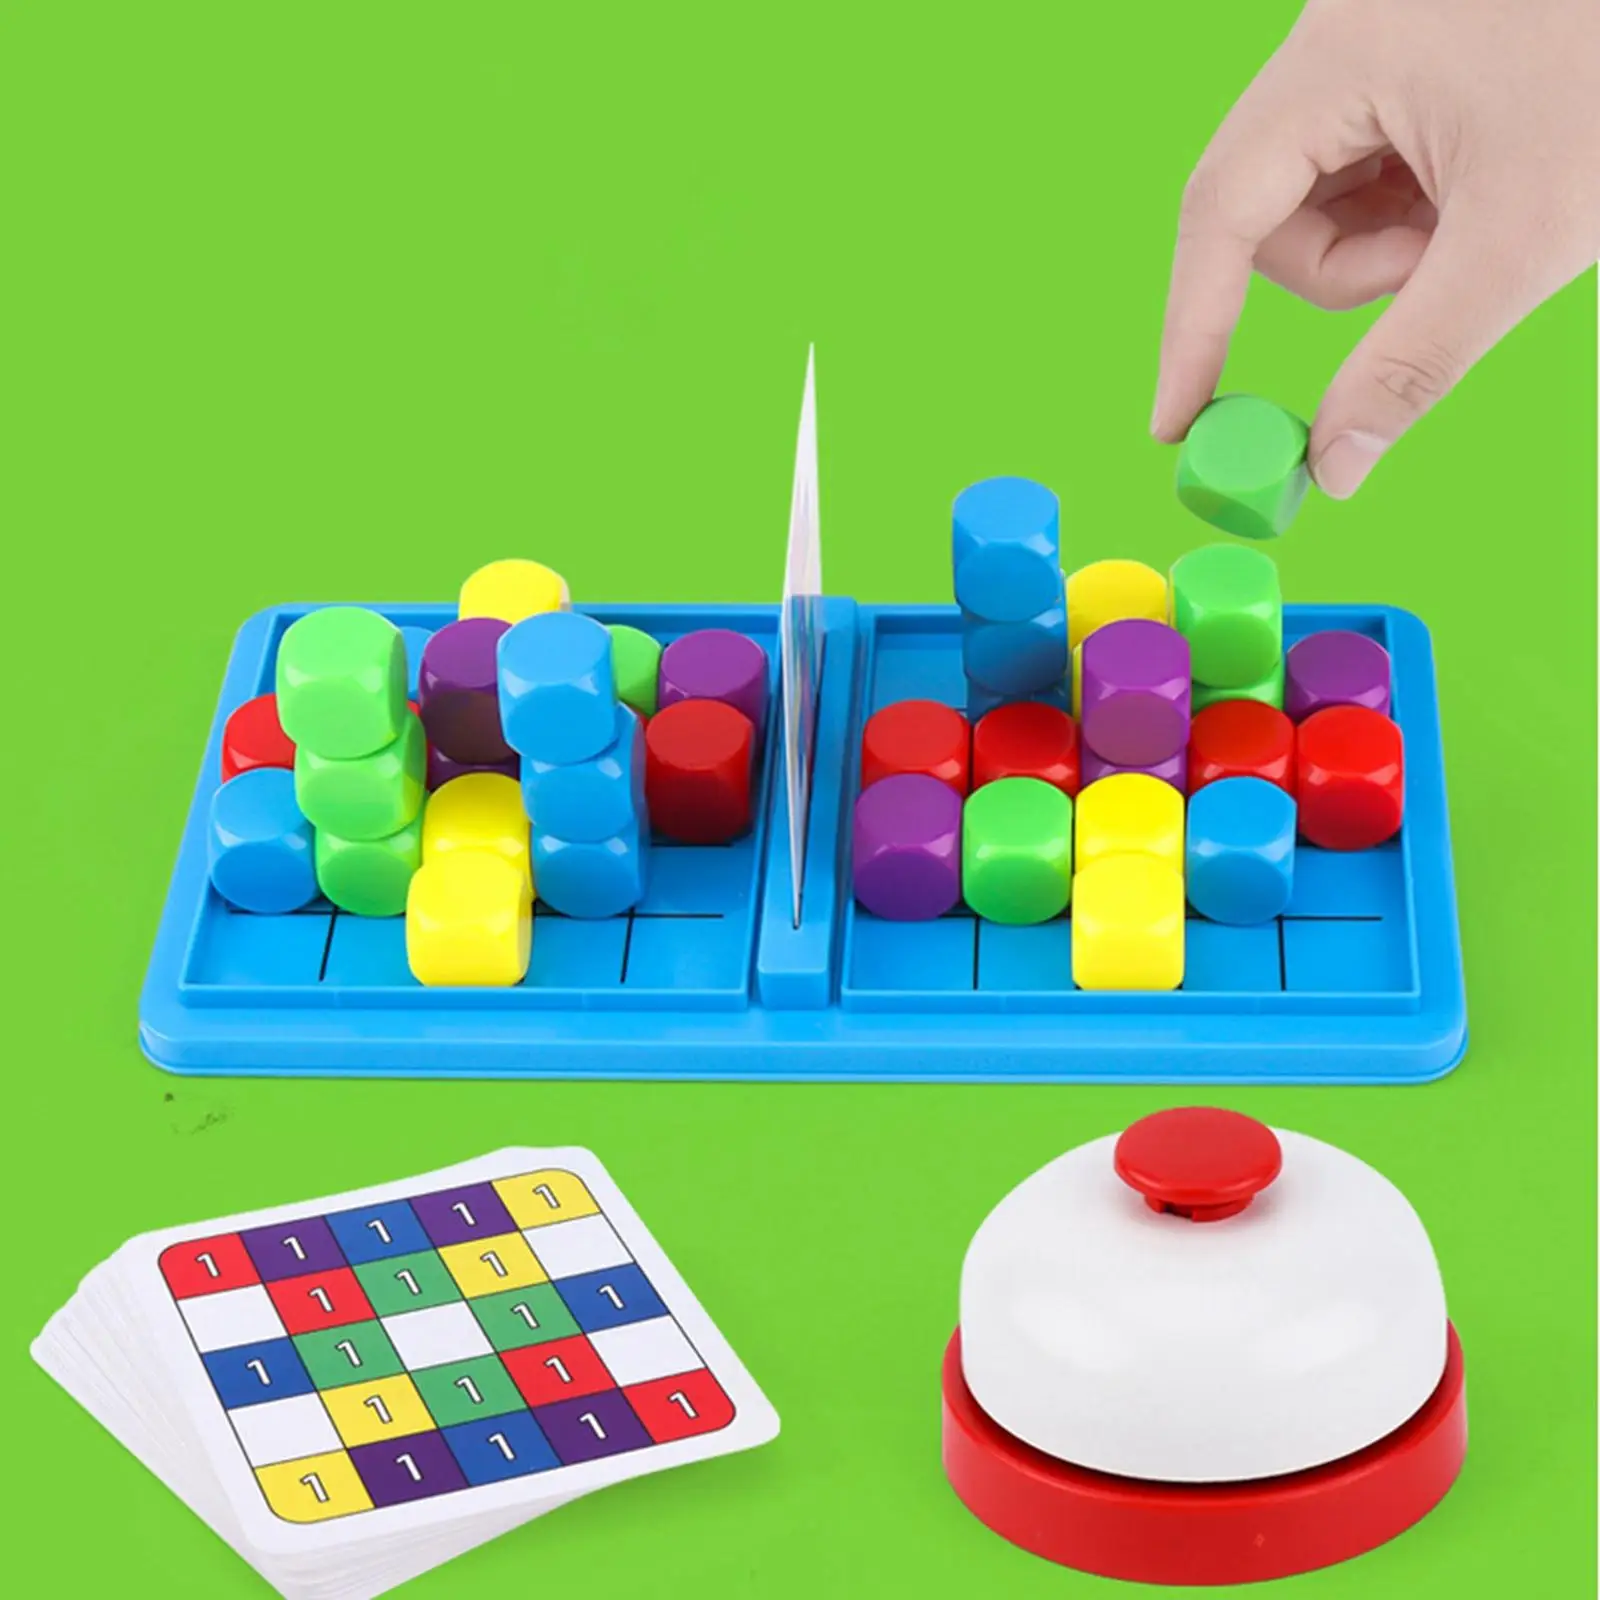 Block Game Fast Raced Educational with BLOCKERS Flexible Matching Race Board Games game for Activity Outdoors Travel Home